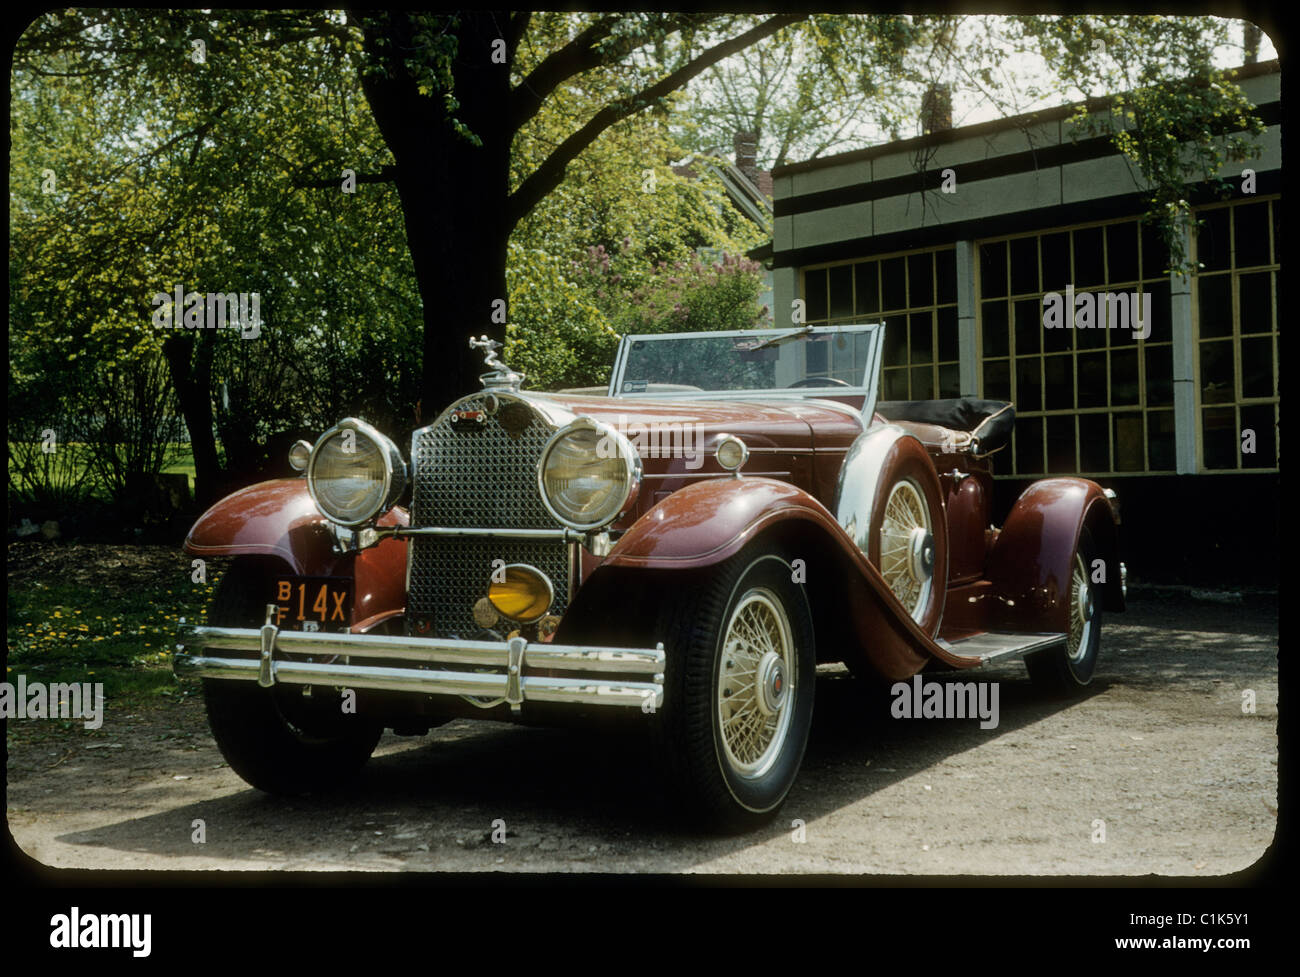 Antique car parked in front of home during 1950s Stock Photo